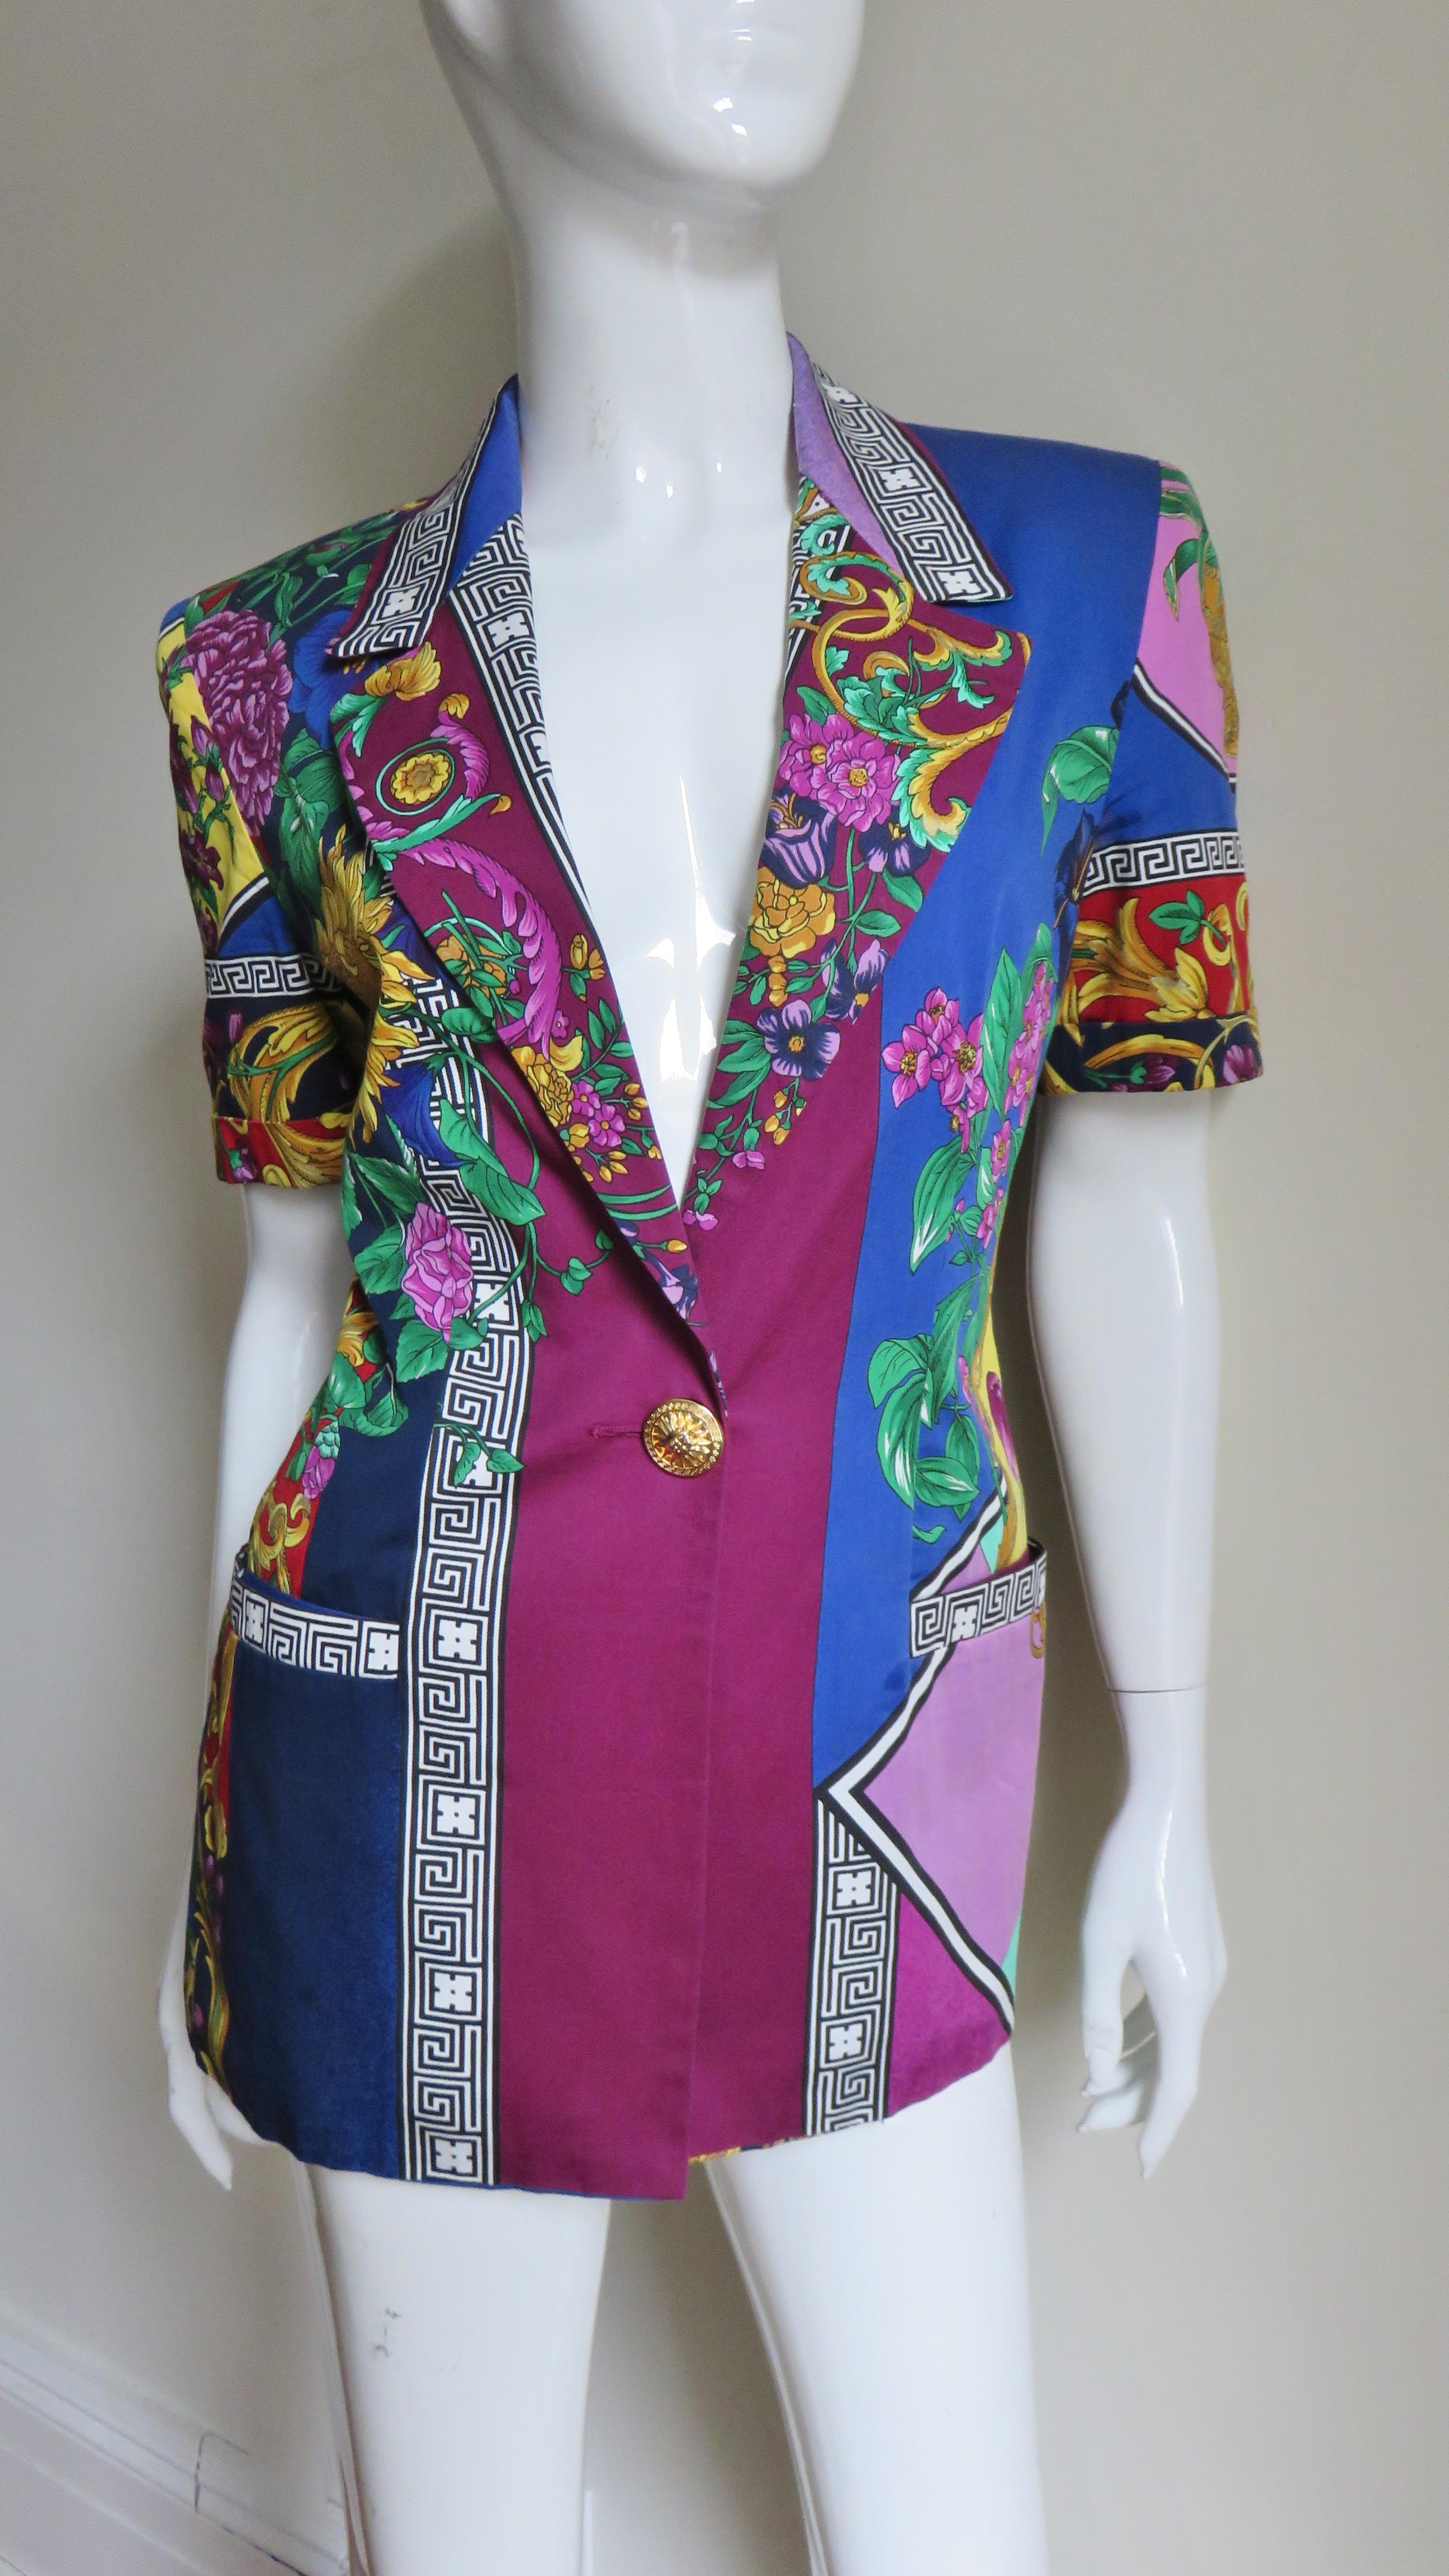 A fabulous short sleeve jacket from Versace Jeans Couture with an elaborate pattern of flowers, leaves, scrolls and Greek Keys Versace is known for in bright colors.  It has a lapel collar, short cuffed sleeves, small shoulder pads and closes with